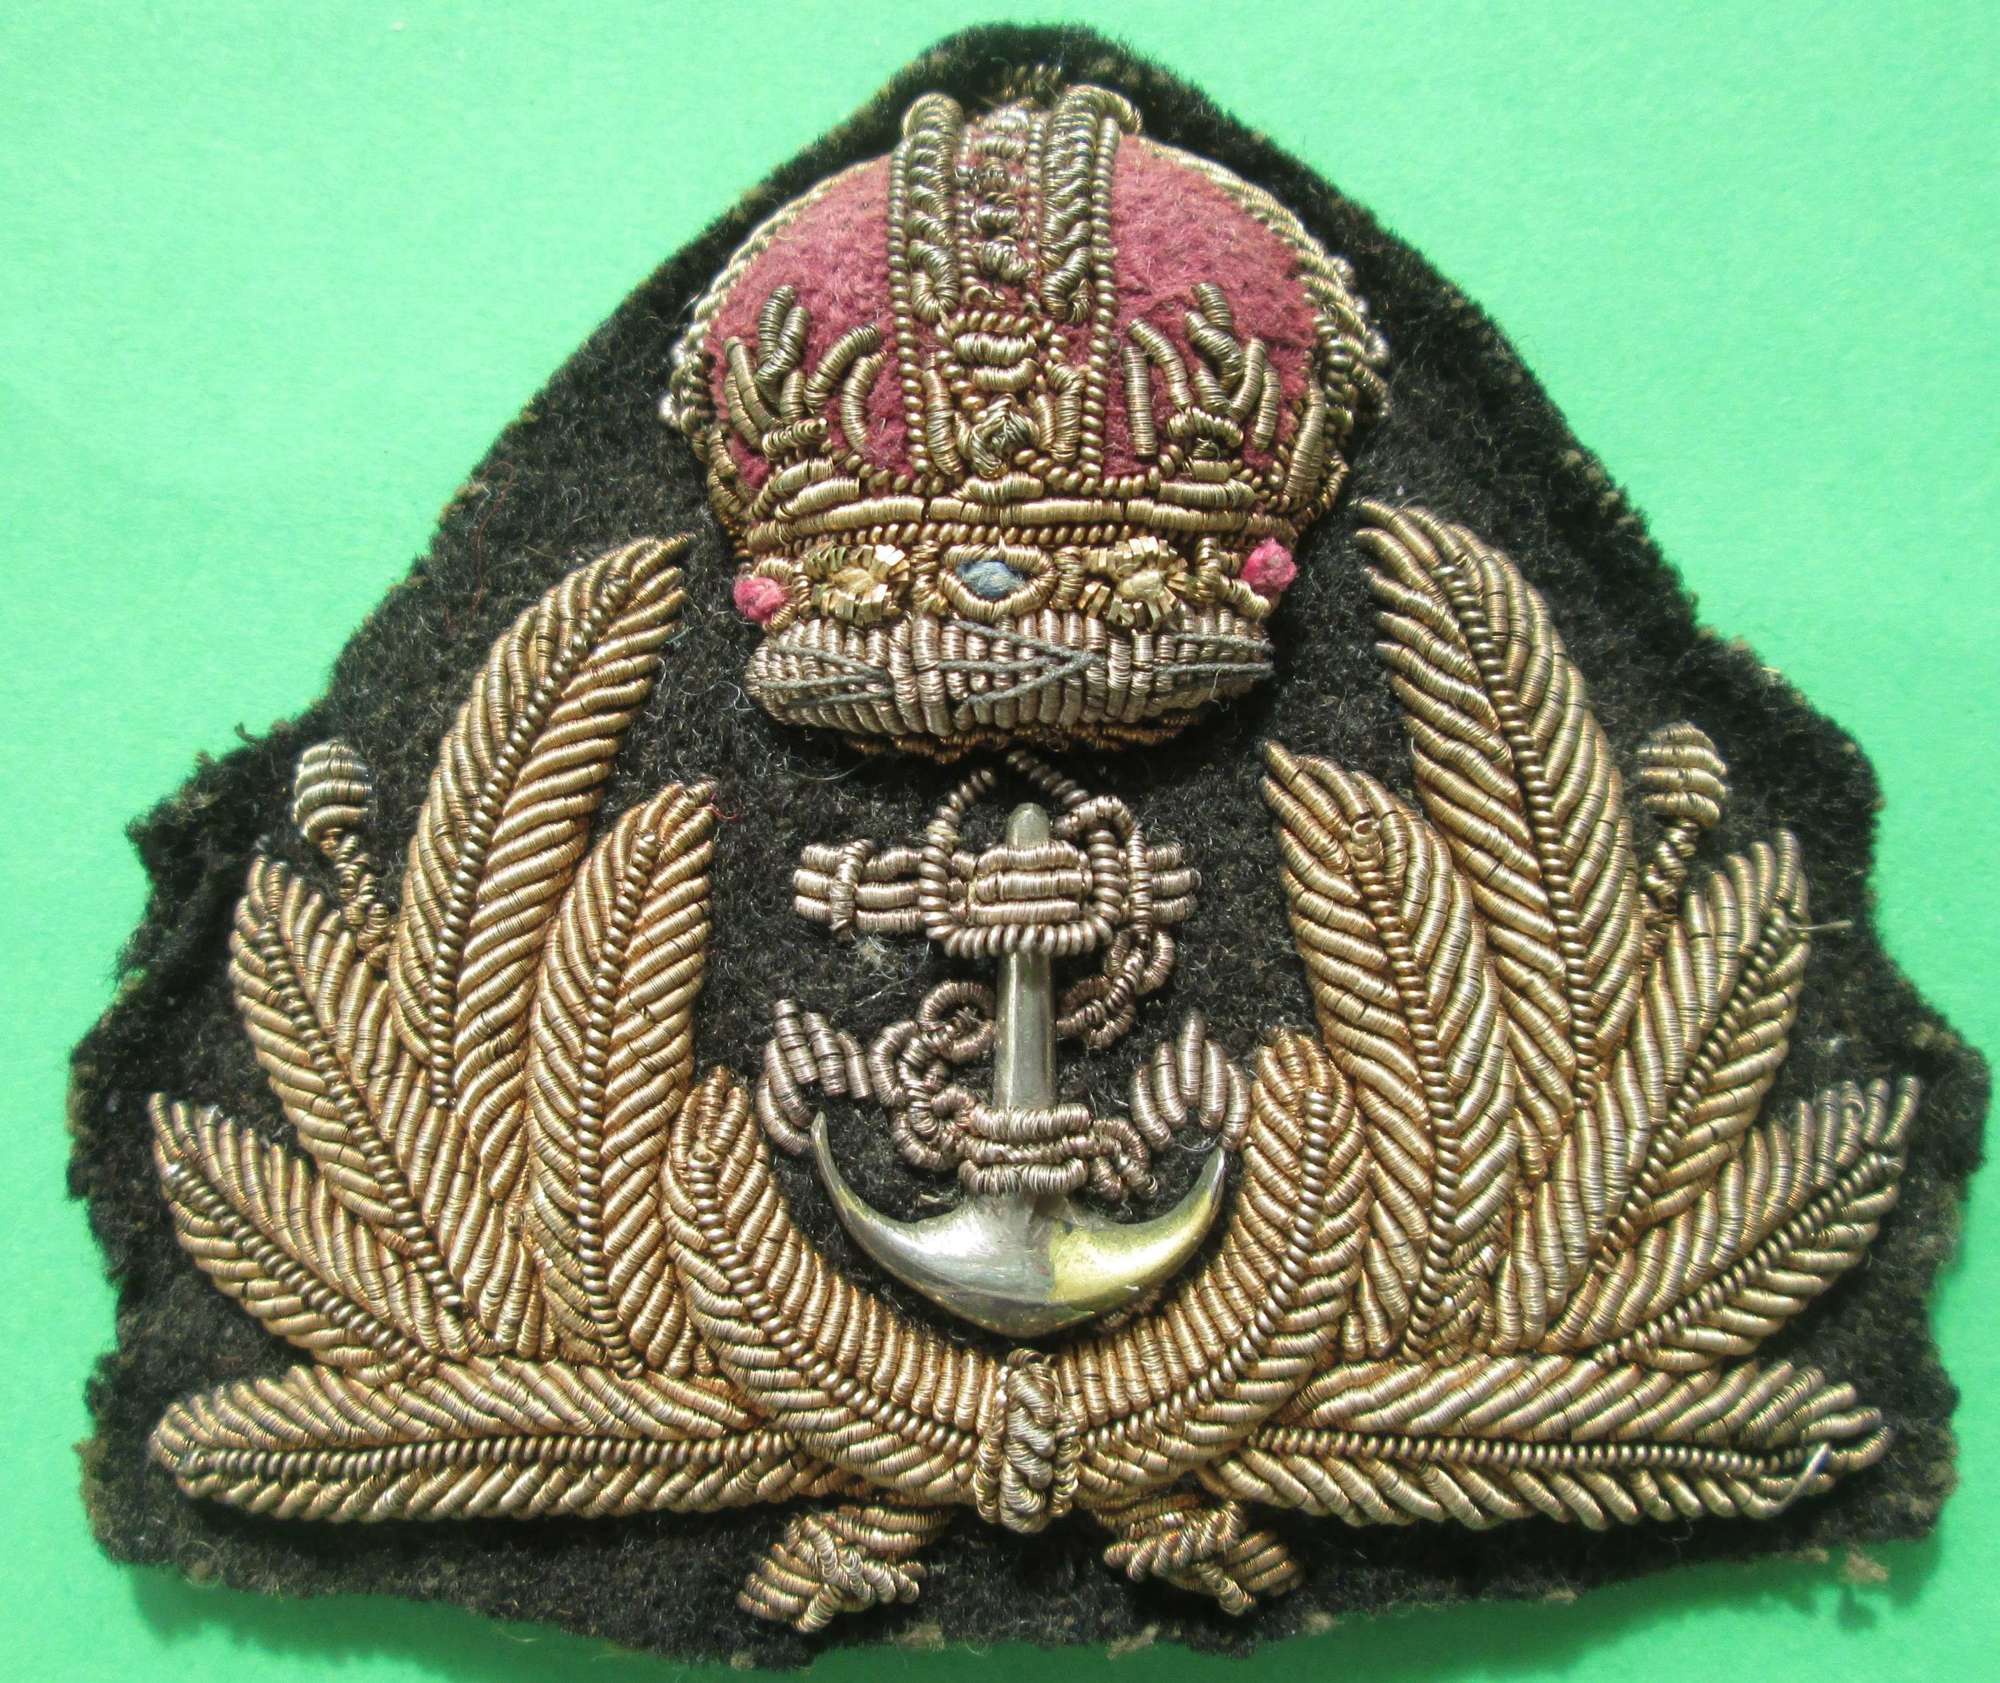 A KING'S CROWN ROYAL NAVY OFFICER'S CAP BADGE